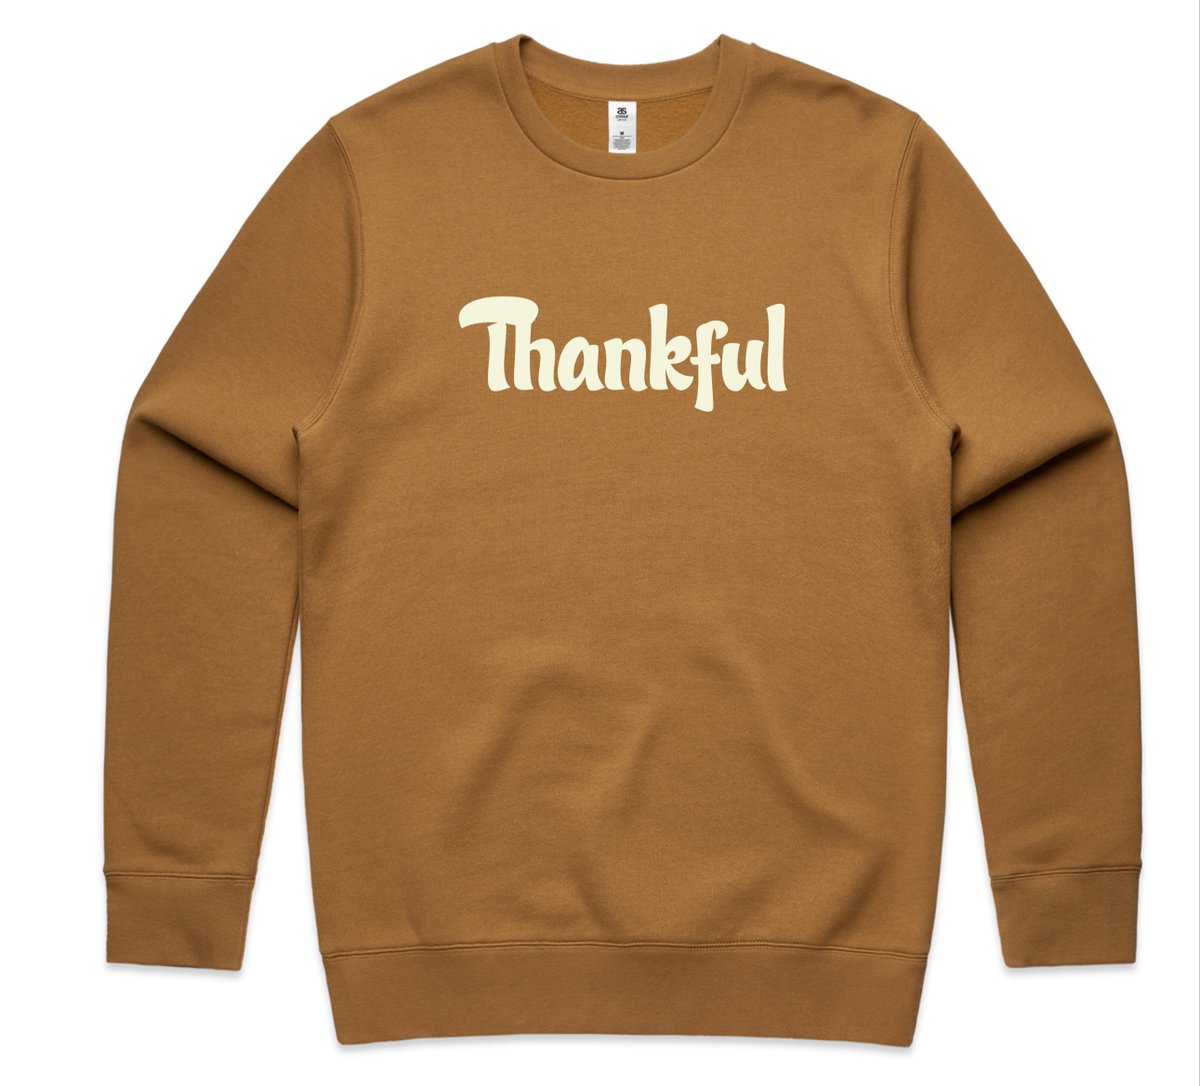 Wrap yourself in gratitude with our cozy Thankful sweater 🍂 #Thankful #ThankfulThursday #sweaterweather affirmationeffect.com/products/thank…